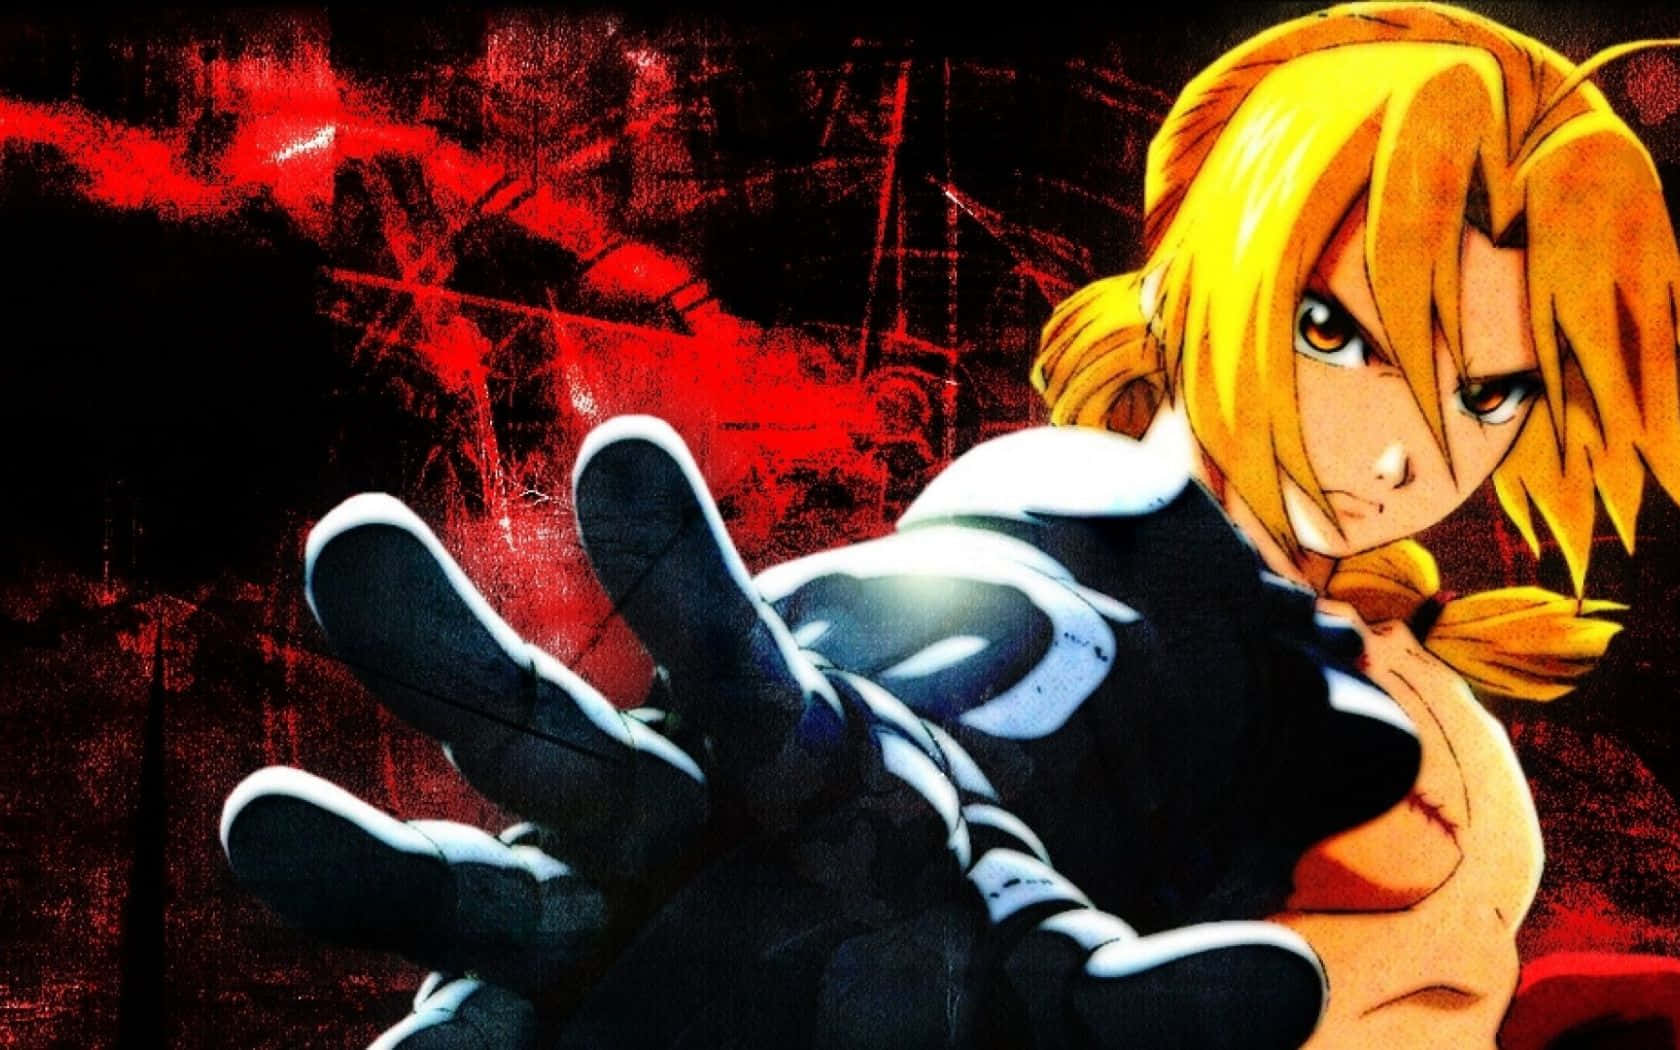 Edward Elric Striking A Confident Pose In His Classic Red Coat Wallpaper